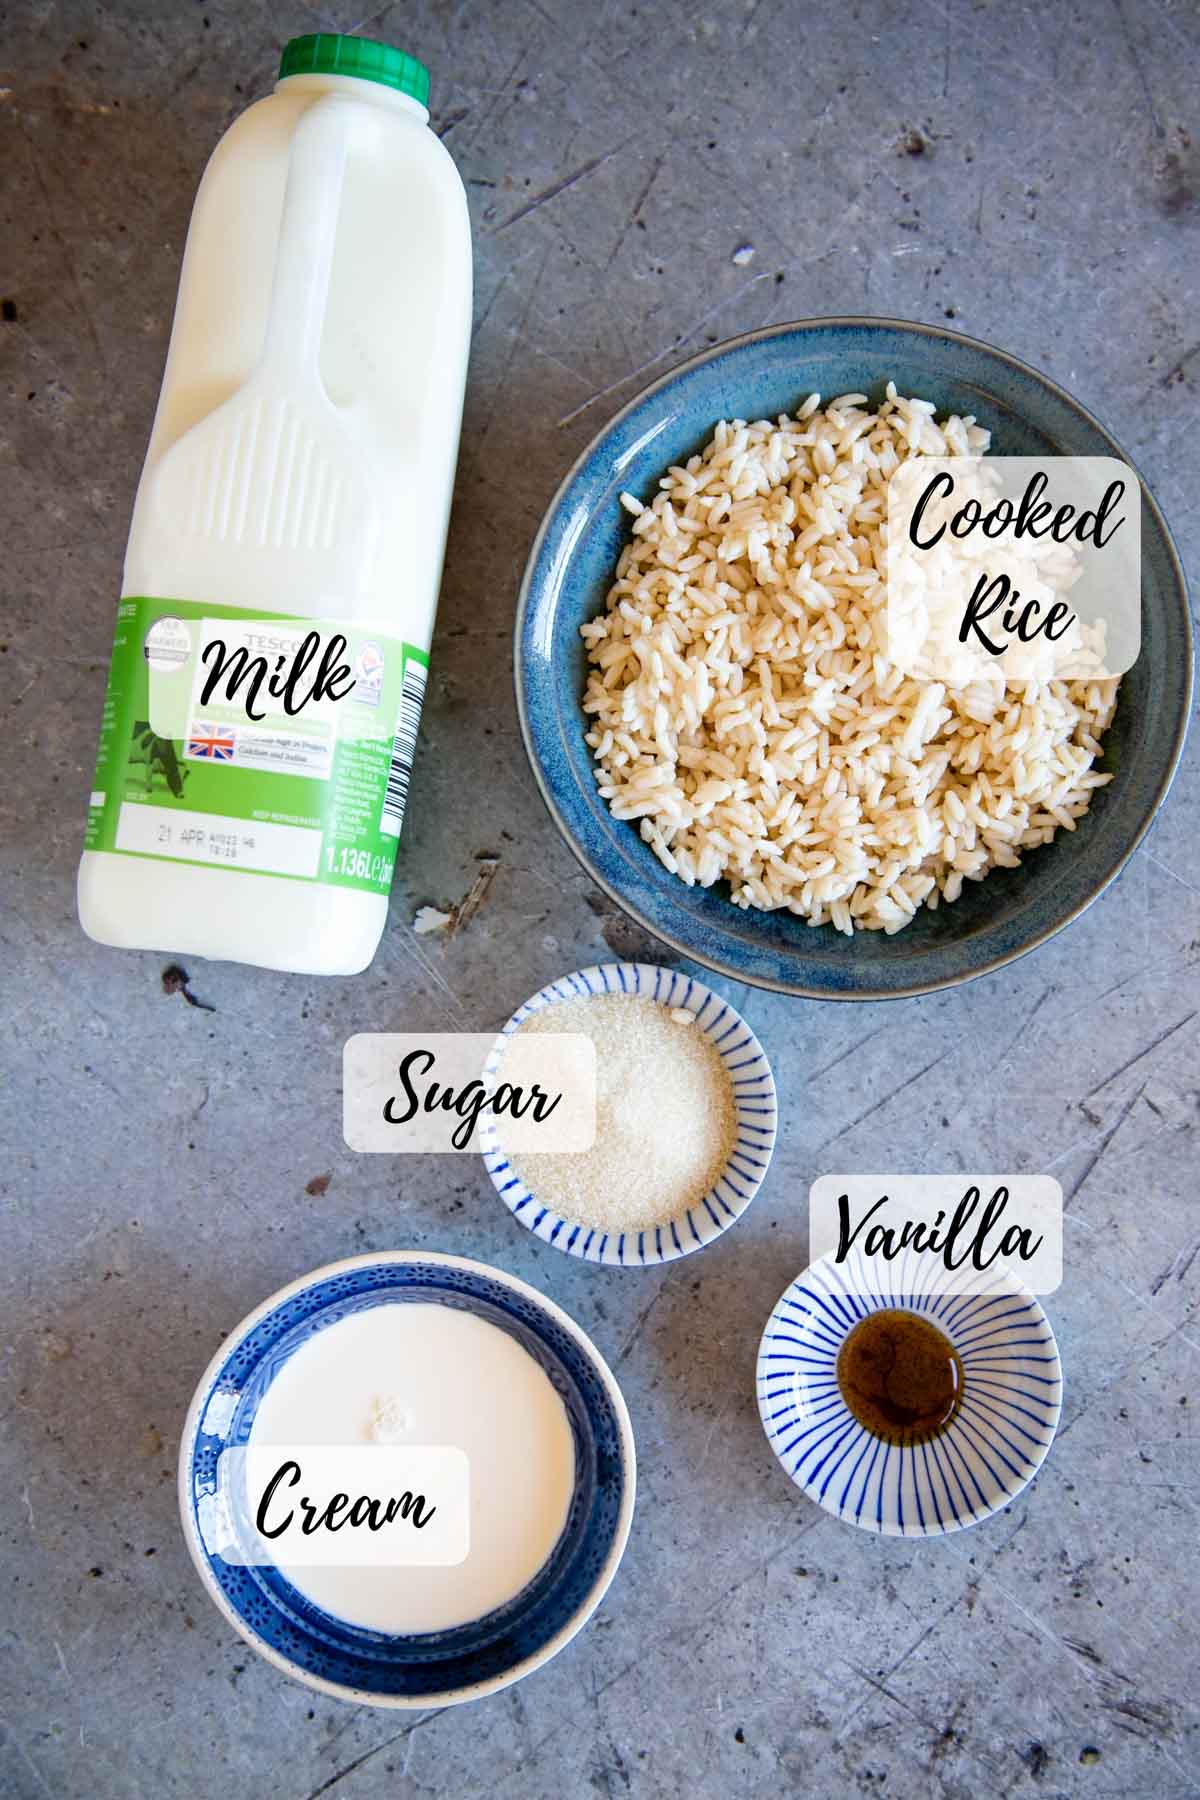 Ingredients for rice pudding with leftover rice: milk, cooked rice, vanilla, cream and sugar.